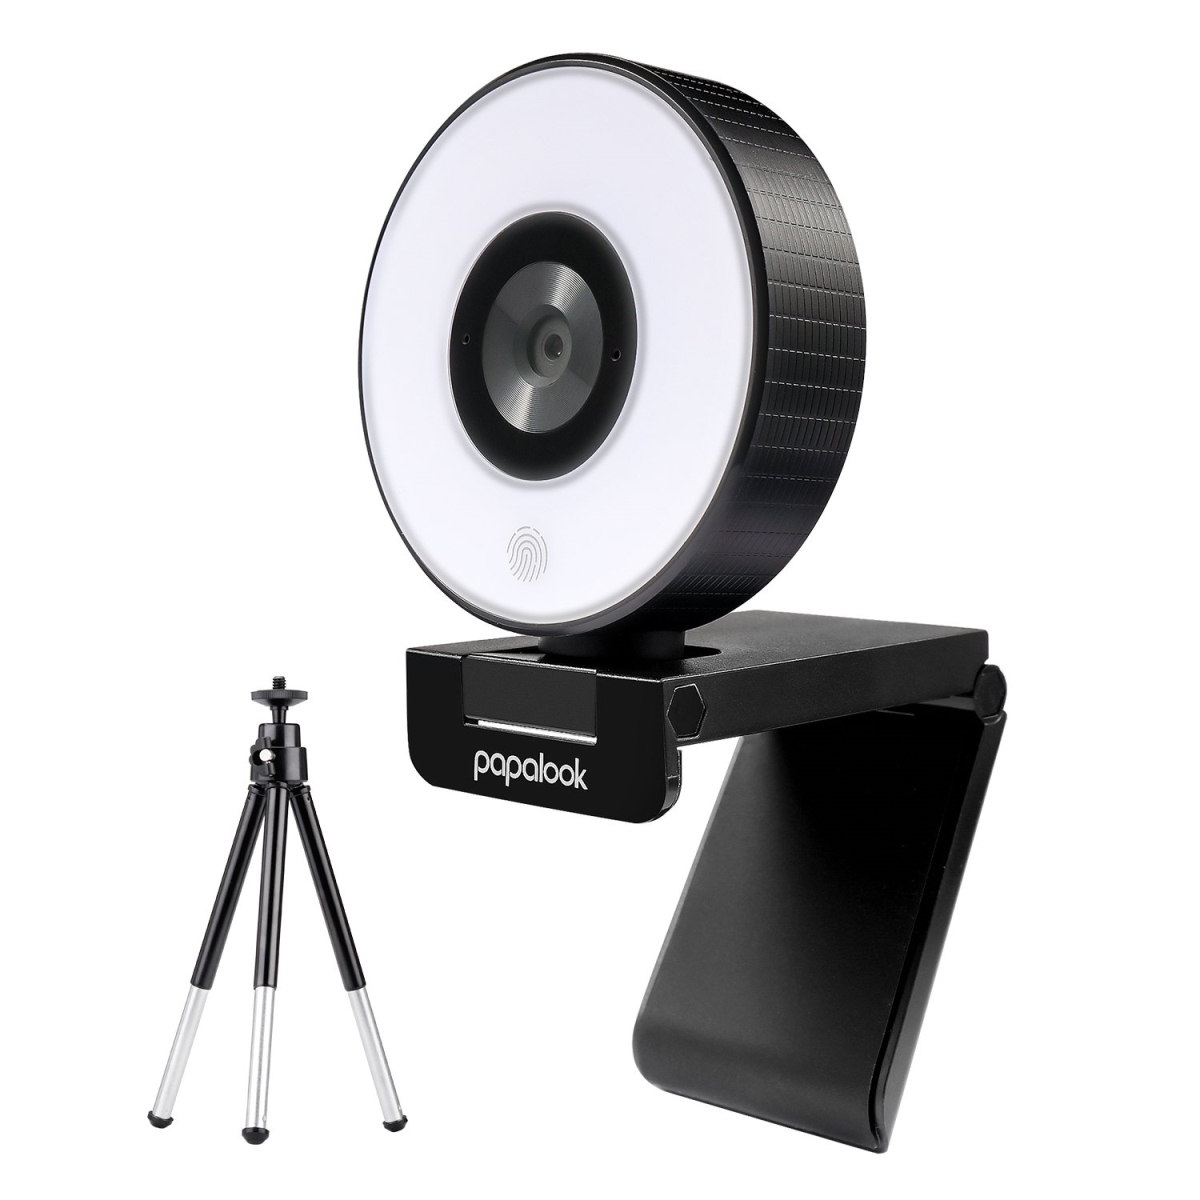 Picture of Papalook PA552 Live Streaming Webcam with Ring Light